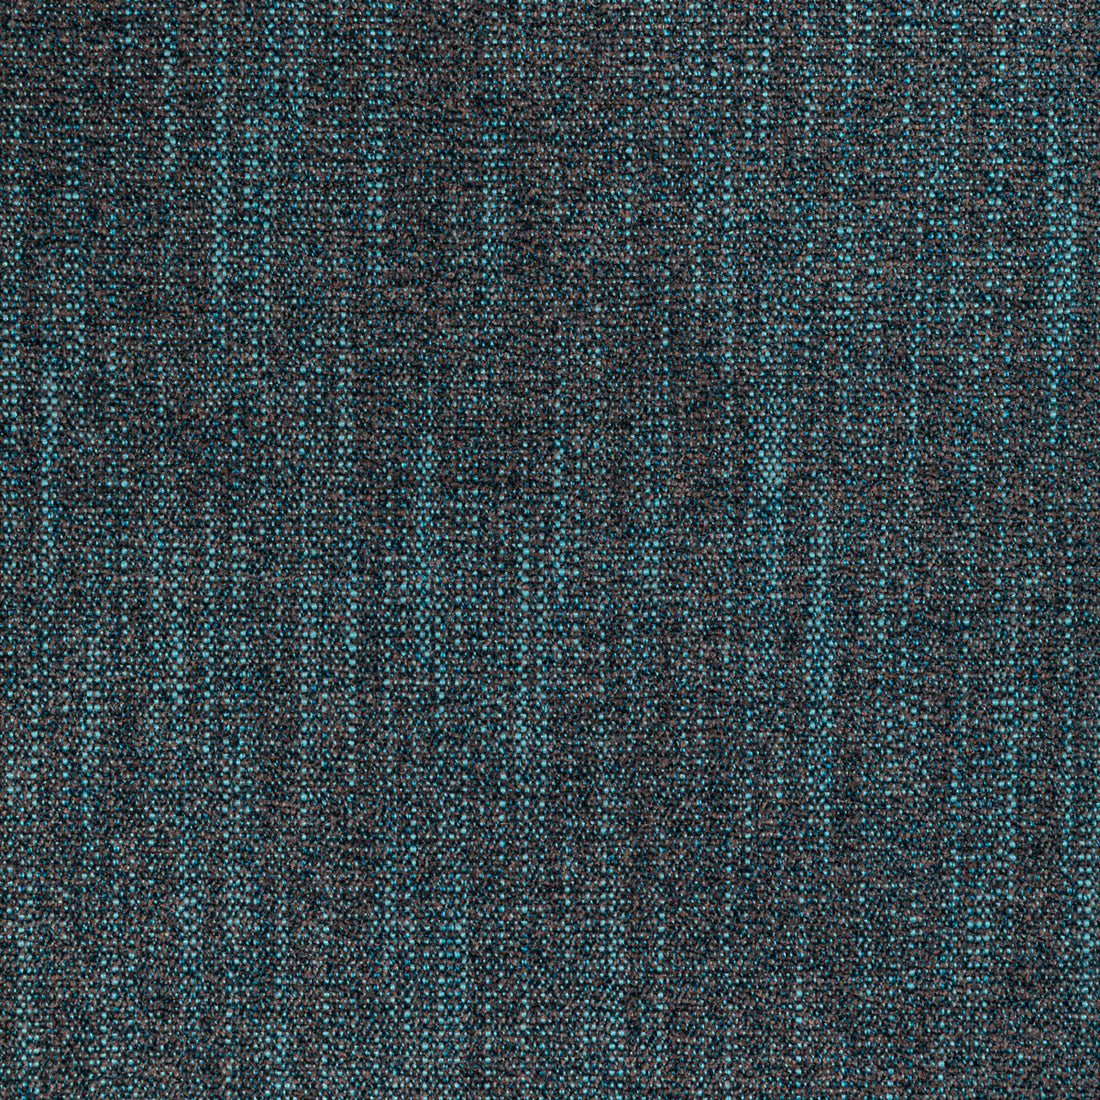 Marnie fabric in denim color - pattern 36747.5.0 - by Kravet Contract in the Refined Textures Performance Crypton collection